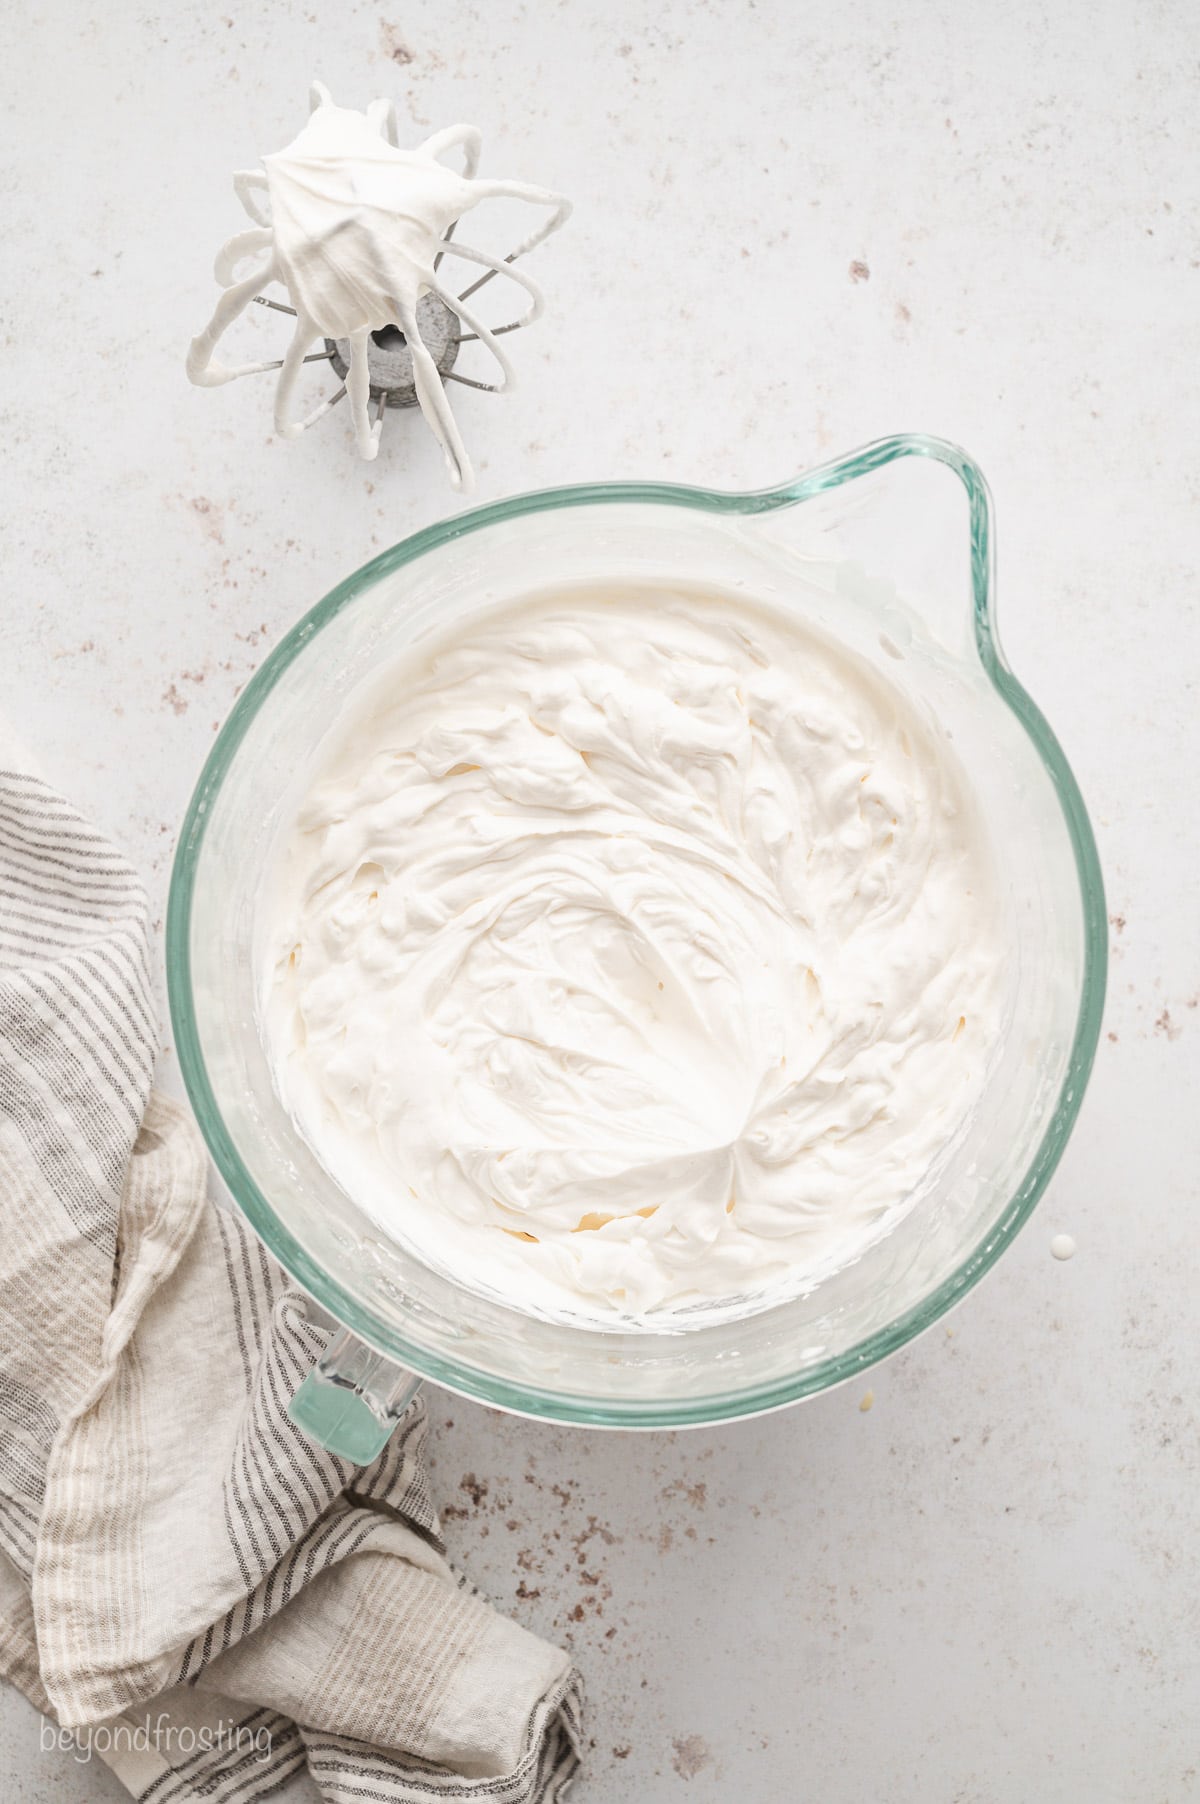 Whipped cream topping in a glass bowl.